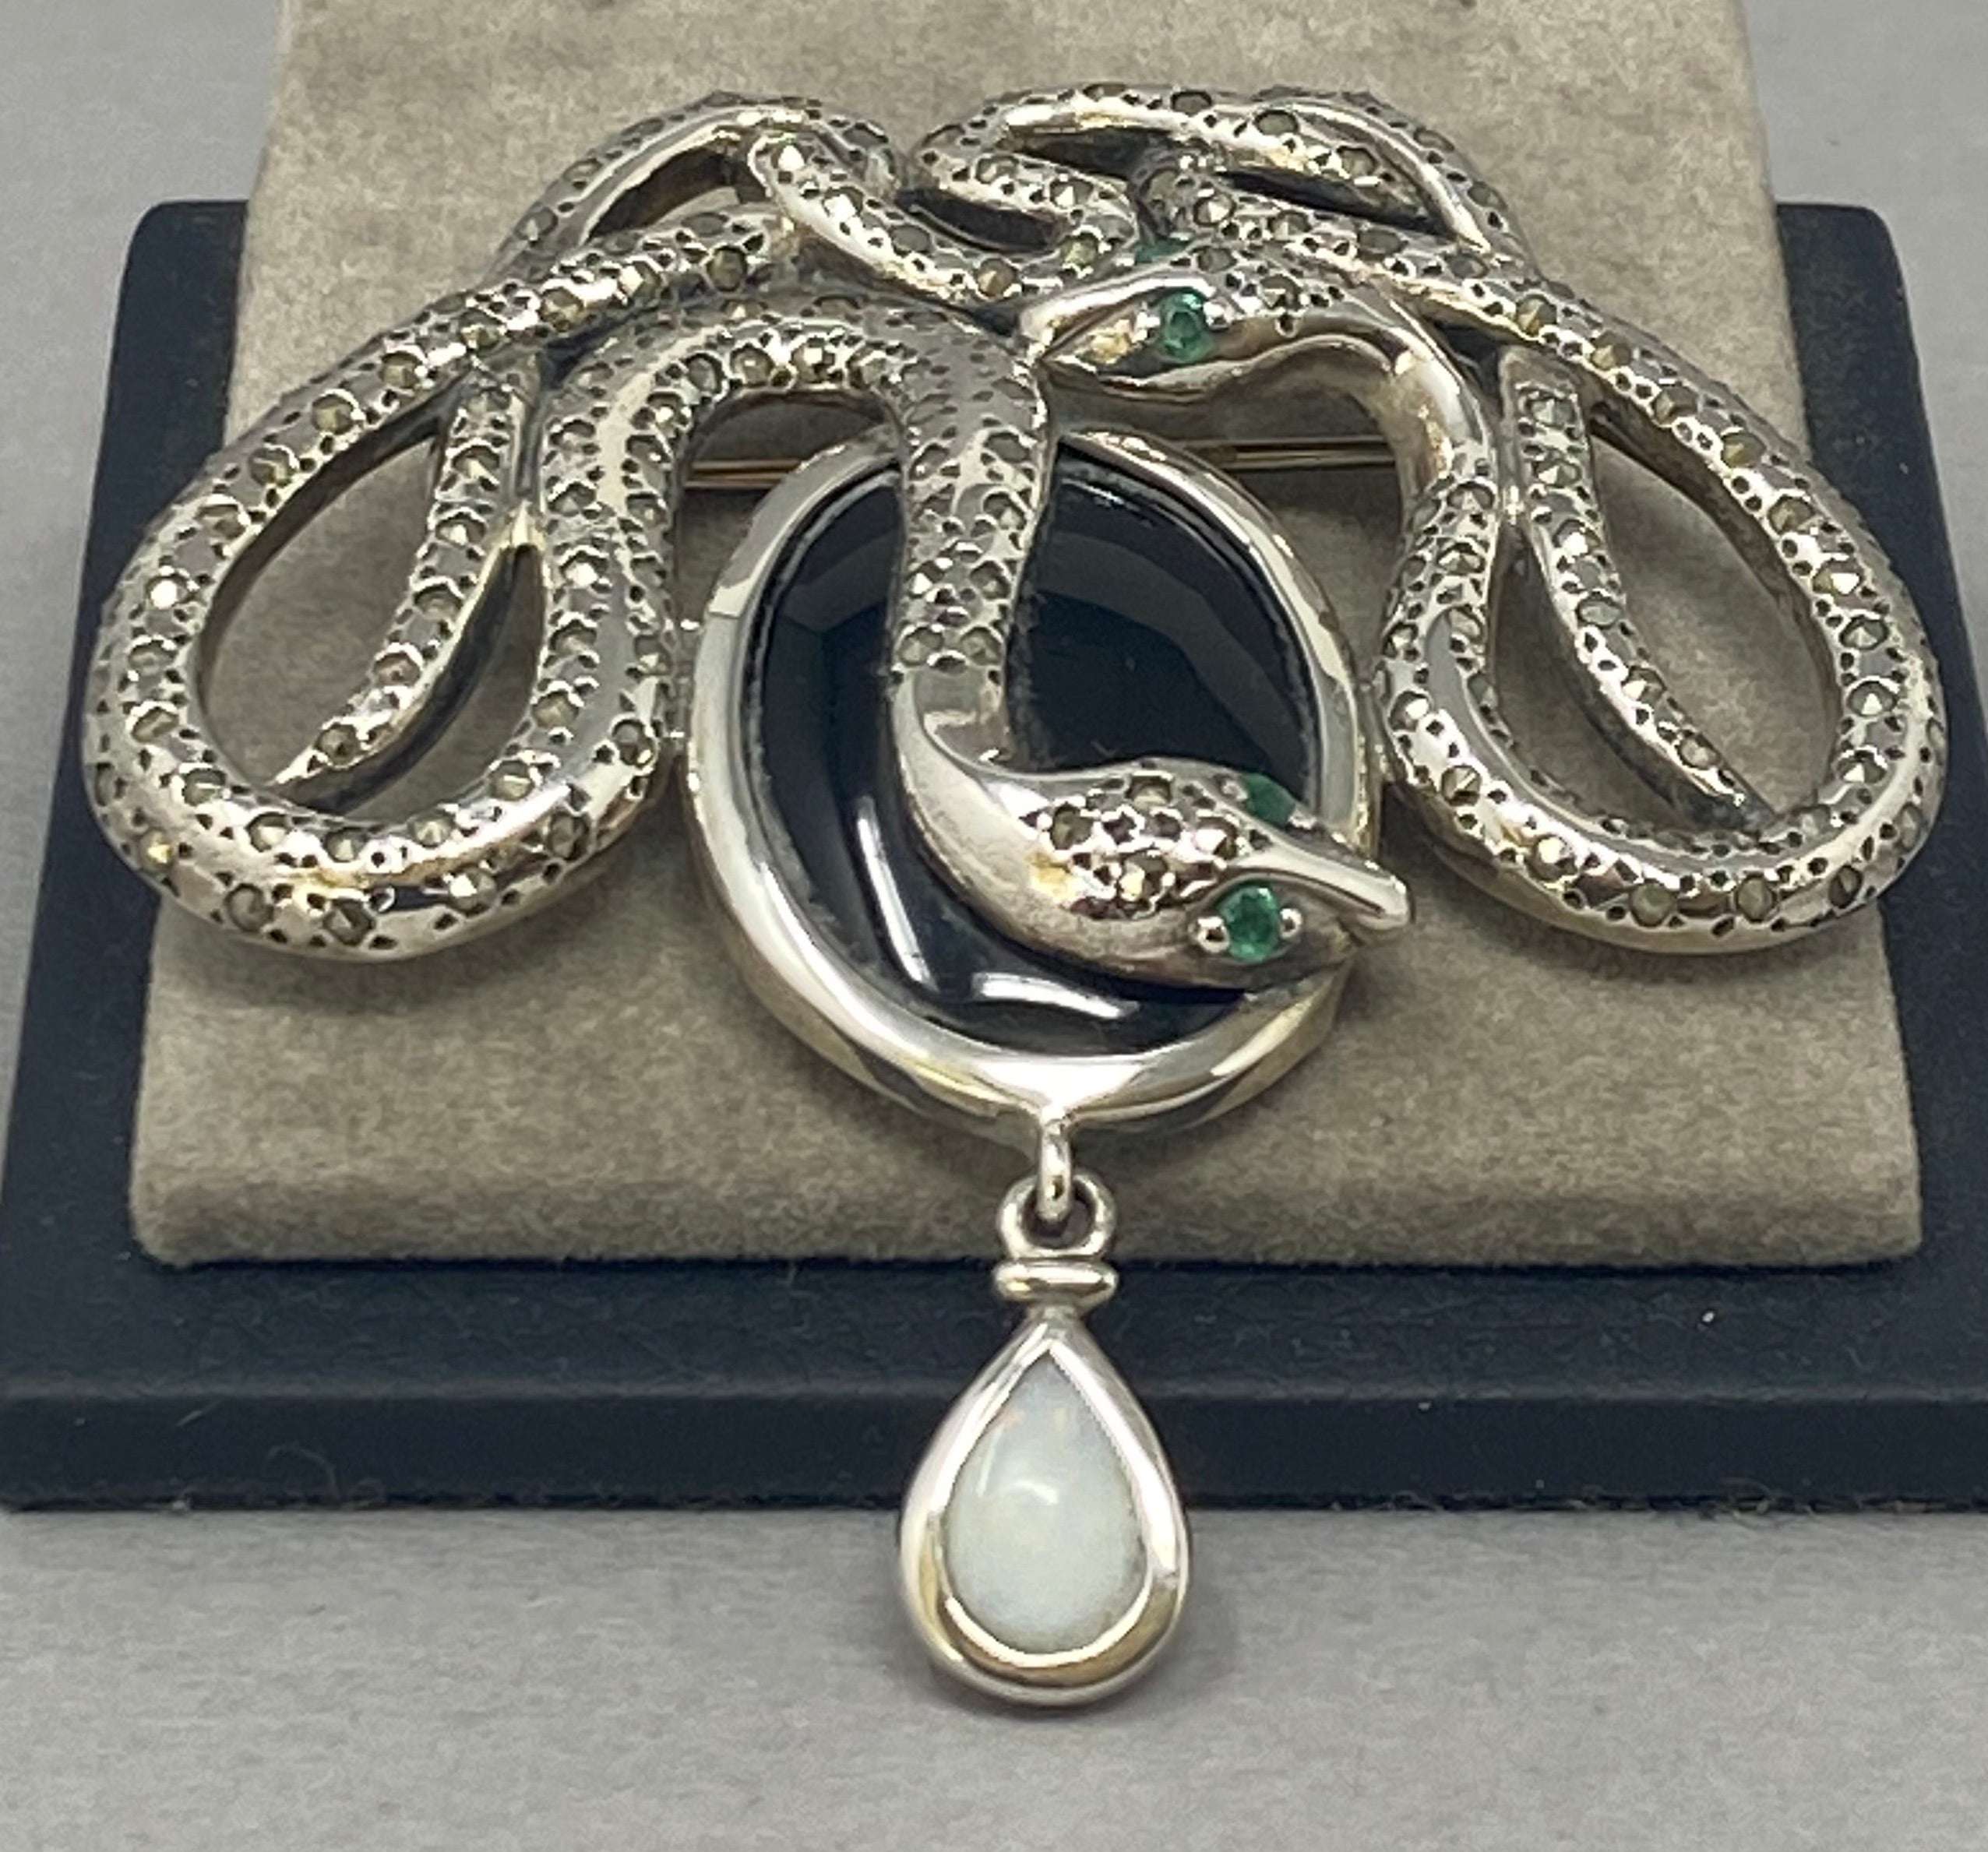 Silver Brooch with Snake Design